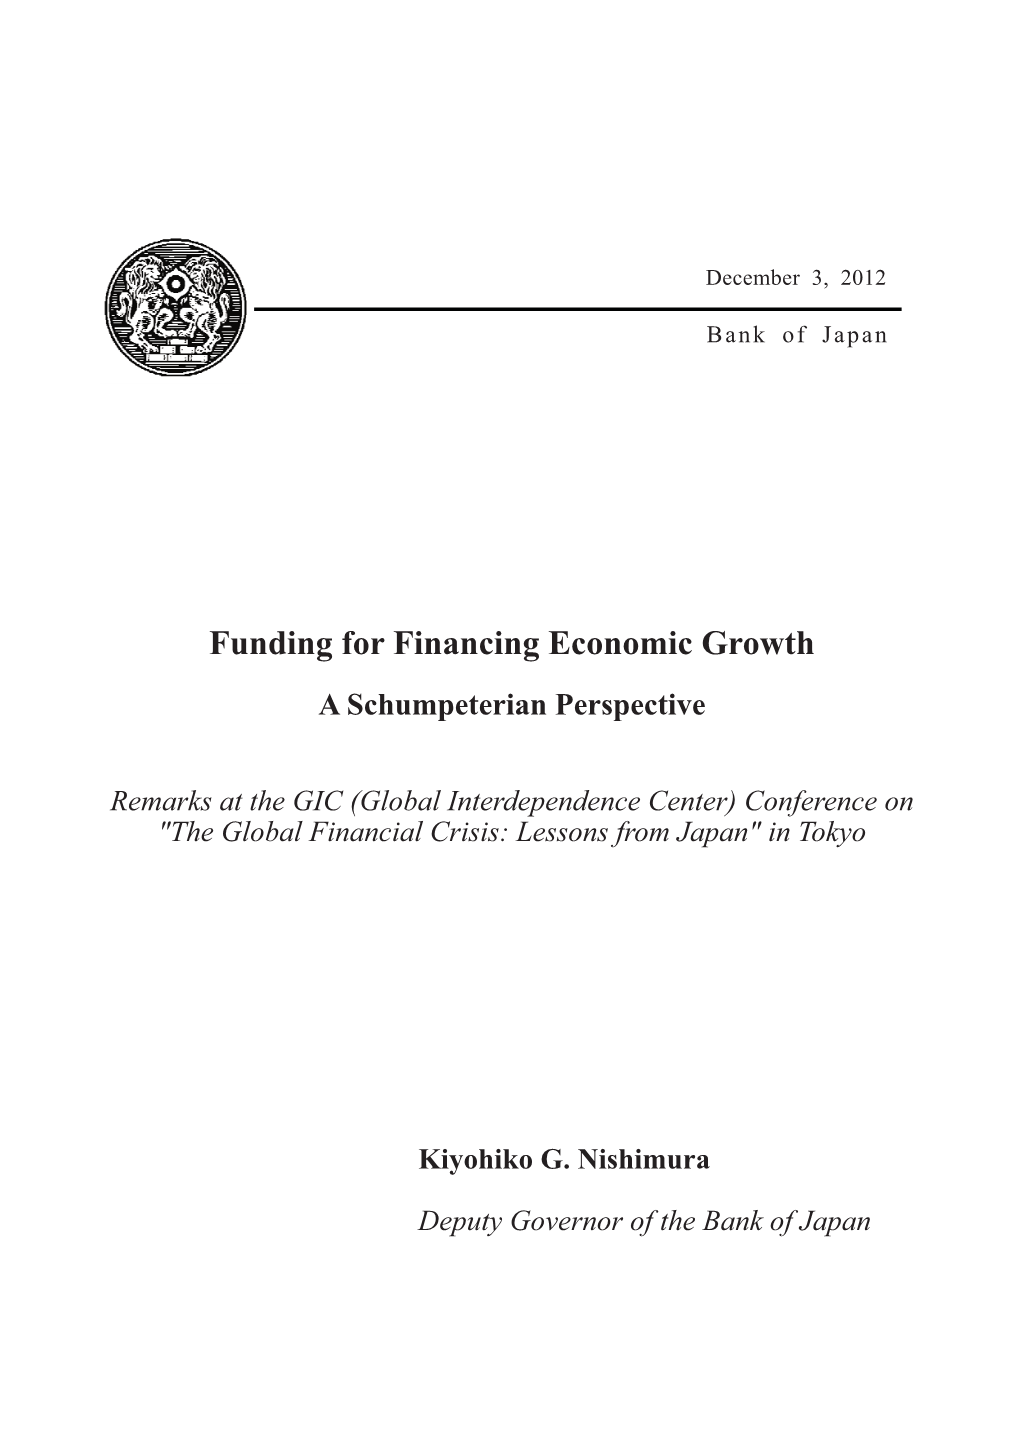 Funding for Financing Economic Growth a Schumpeterian Perspective